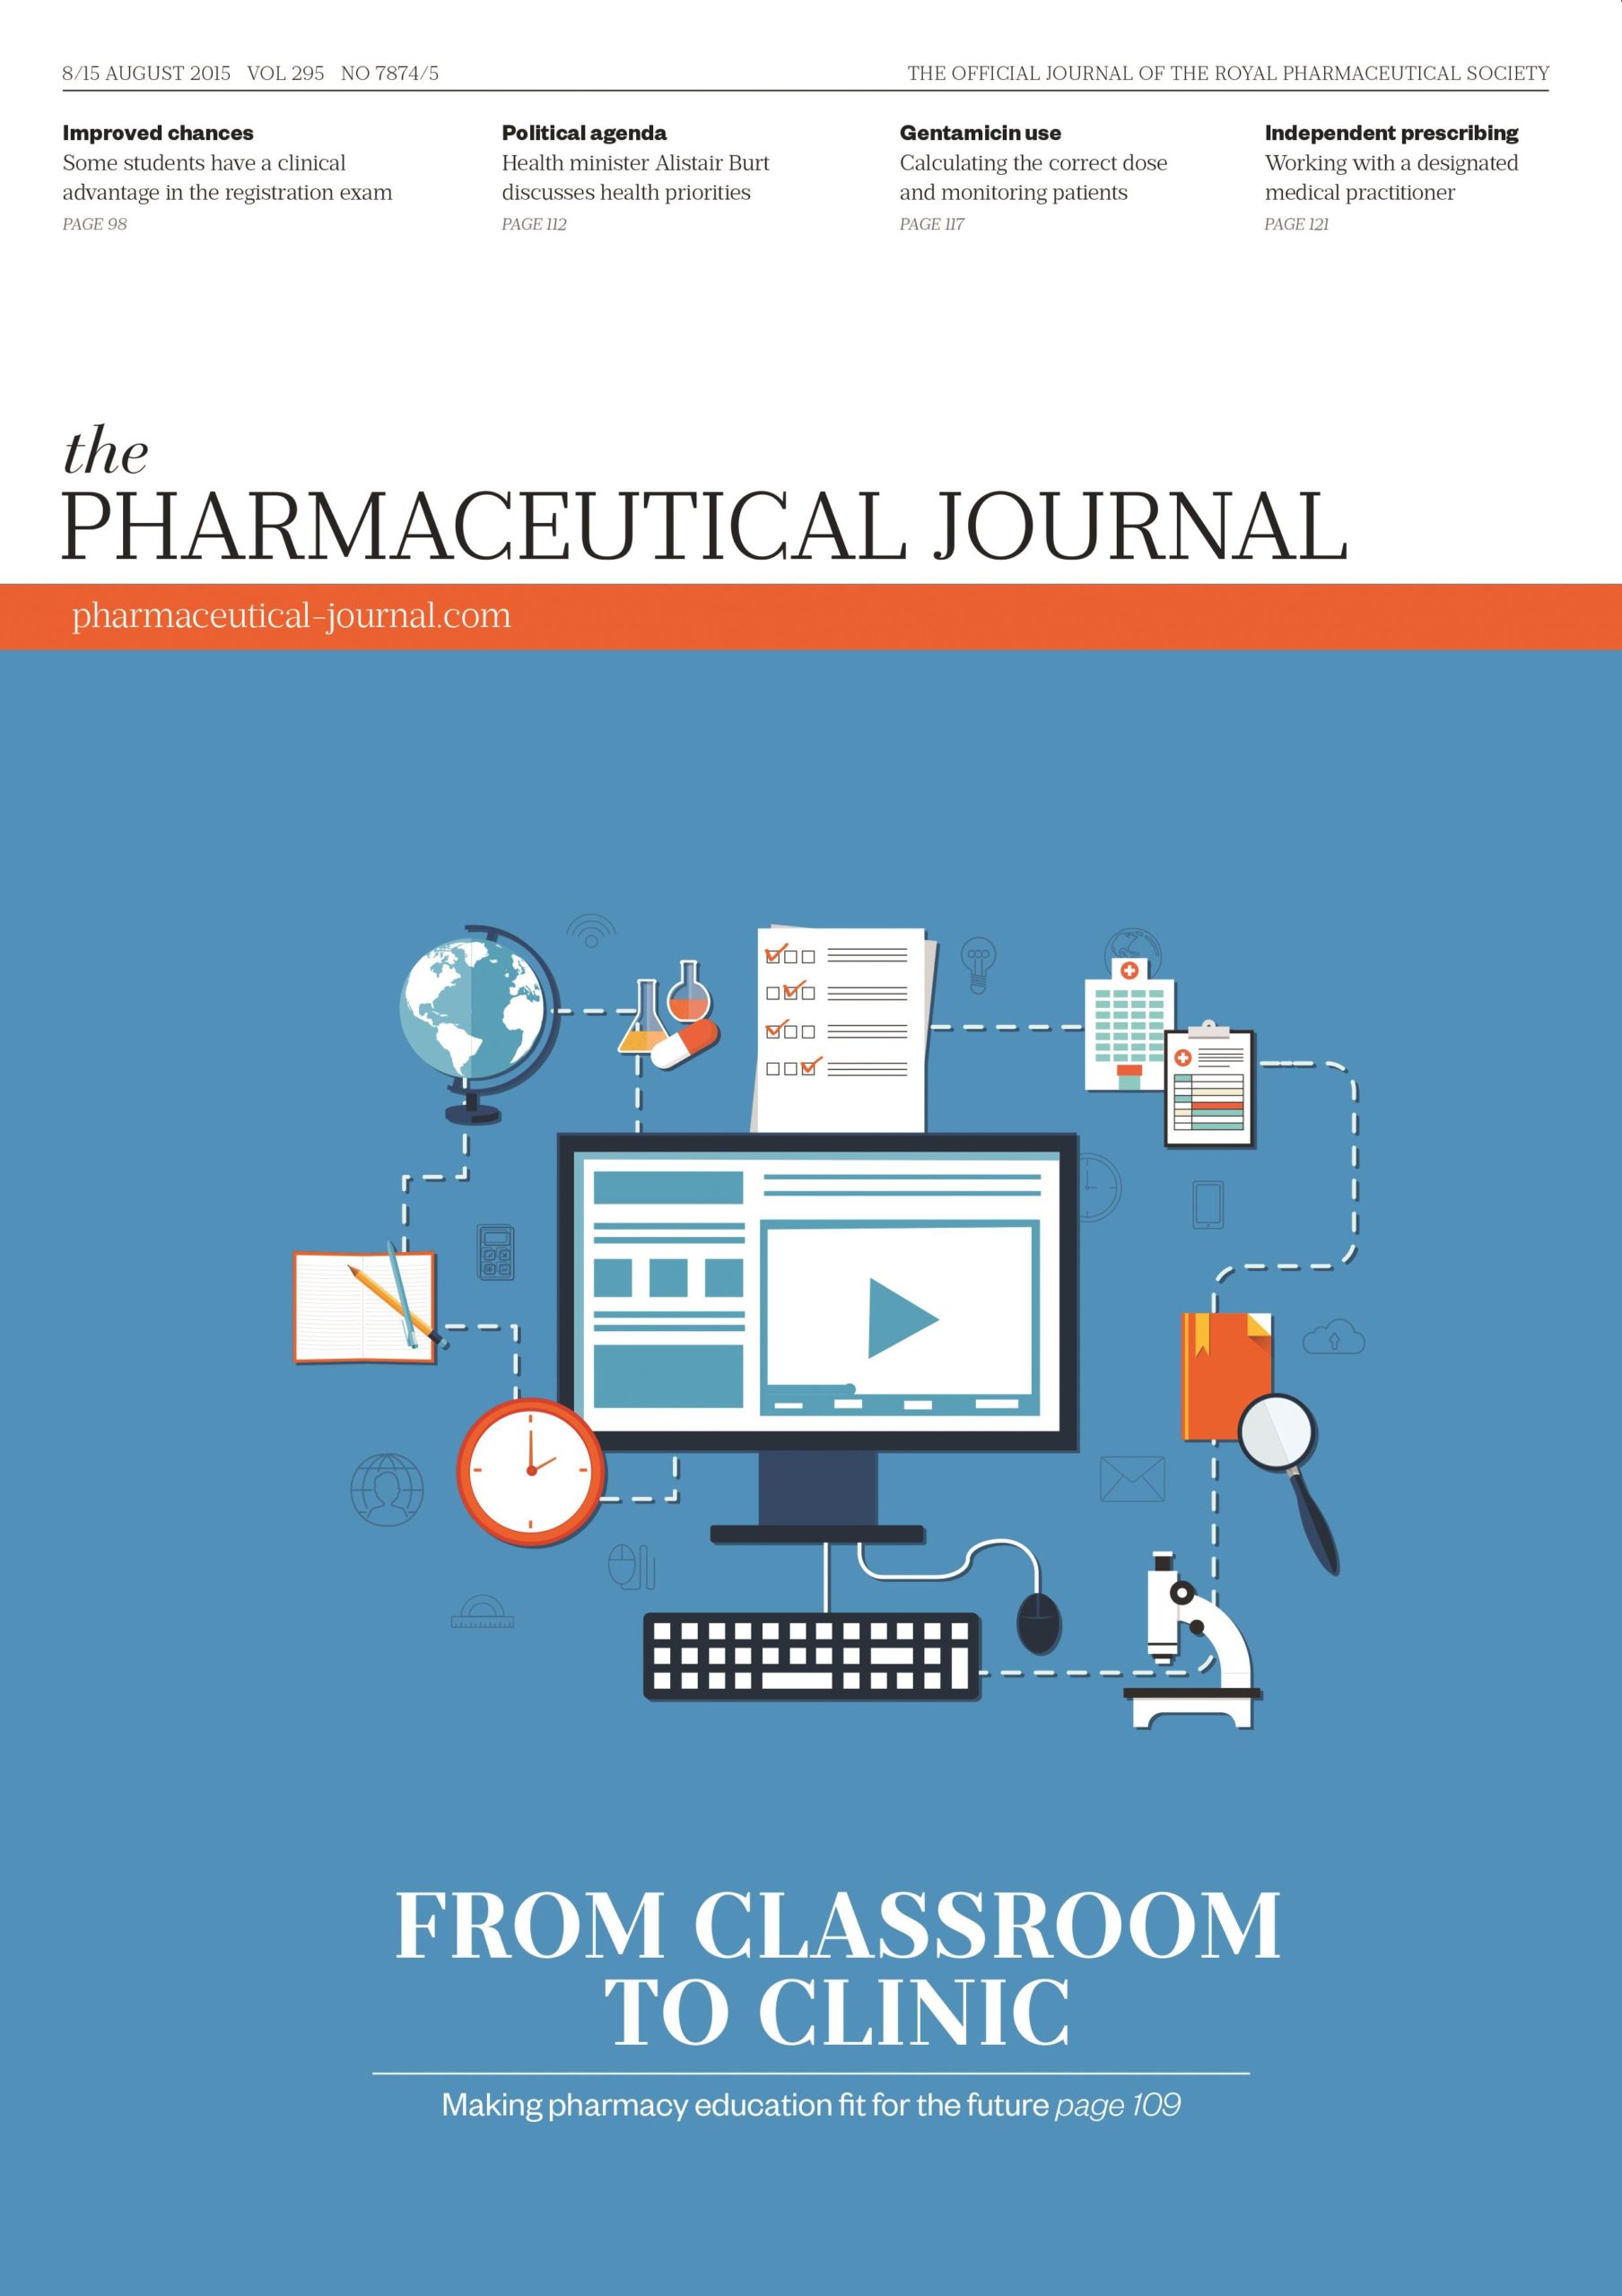 Publication issue cover for PJ, 8/15 August 2015, Vol 295, No 7874/5